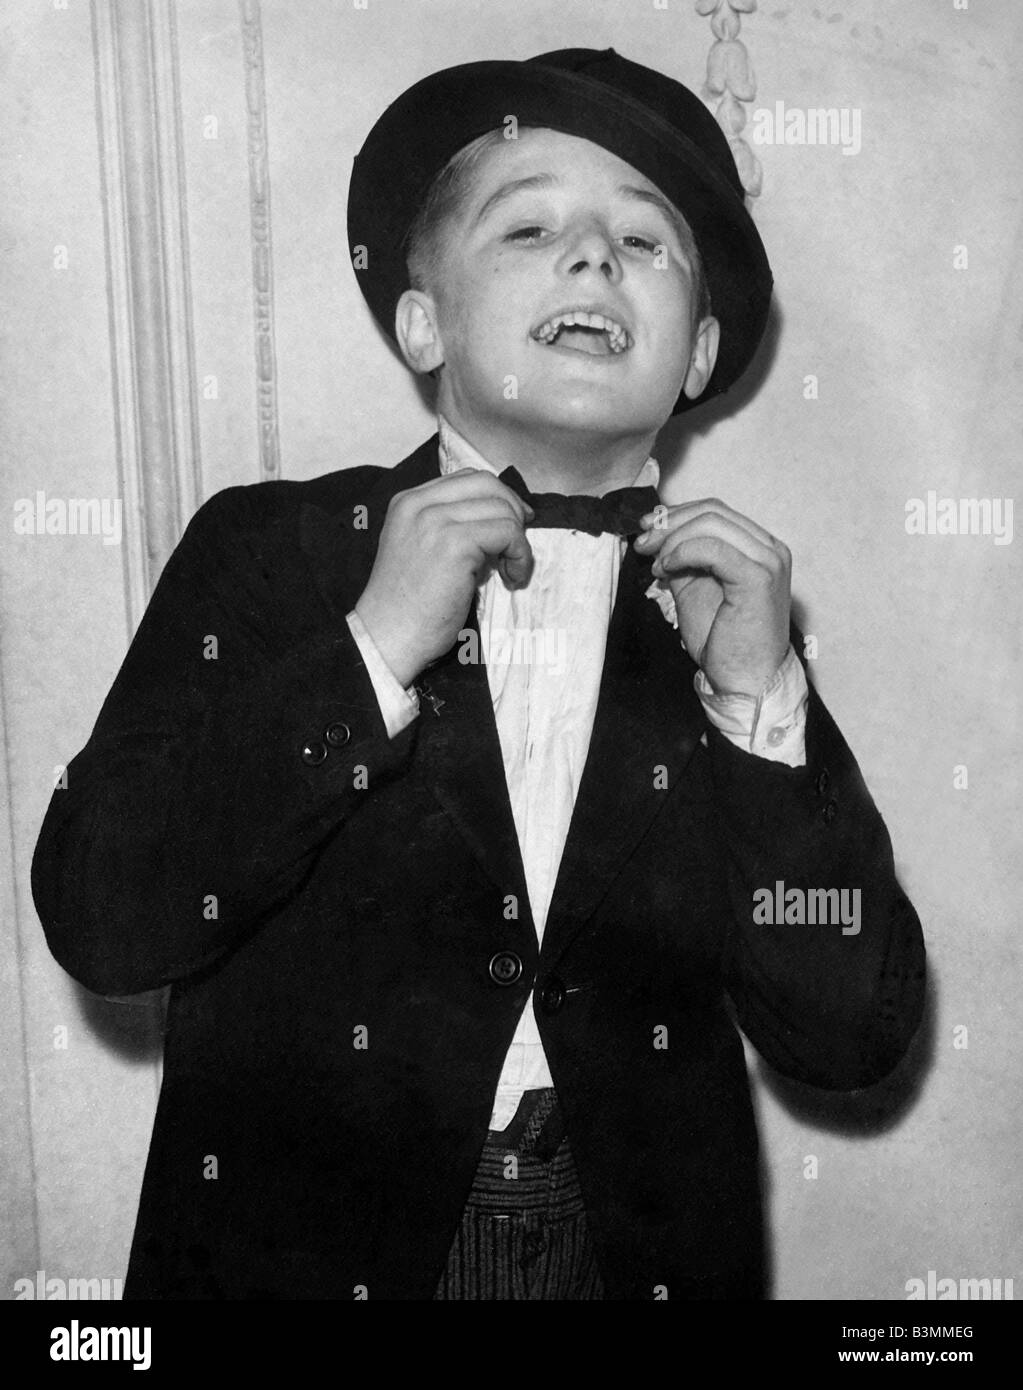 Ernie Wise 13 years old A 13 year old comedian son of a parcel porter on Leeds central station Mirrorpix Stock Photo